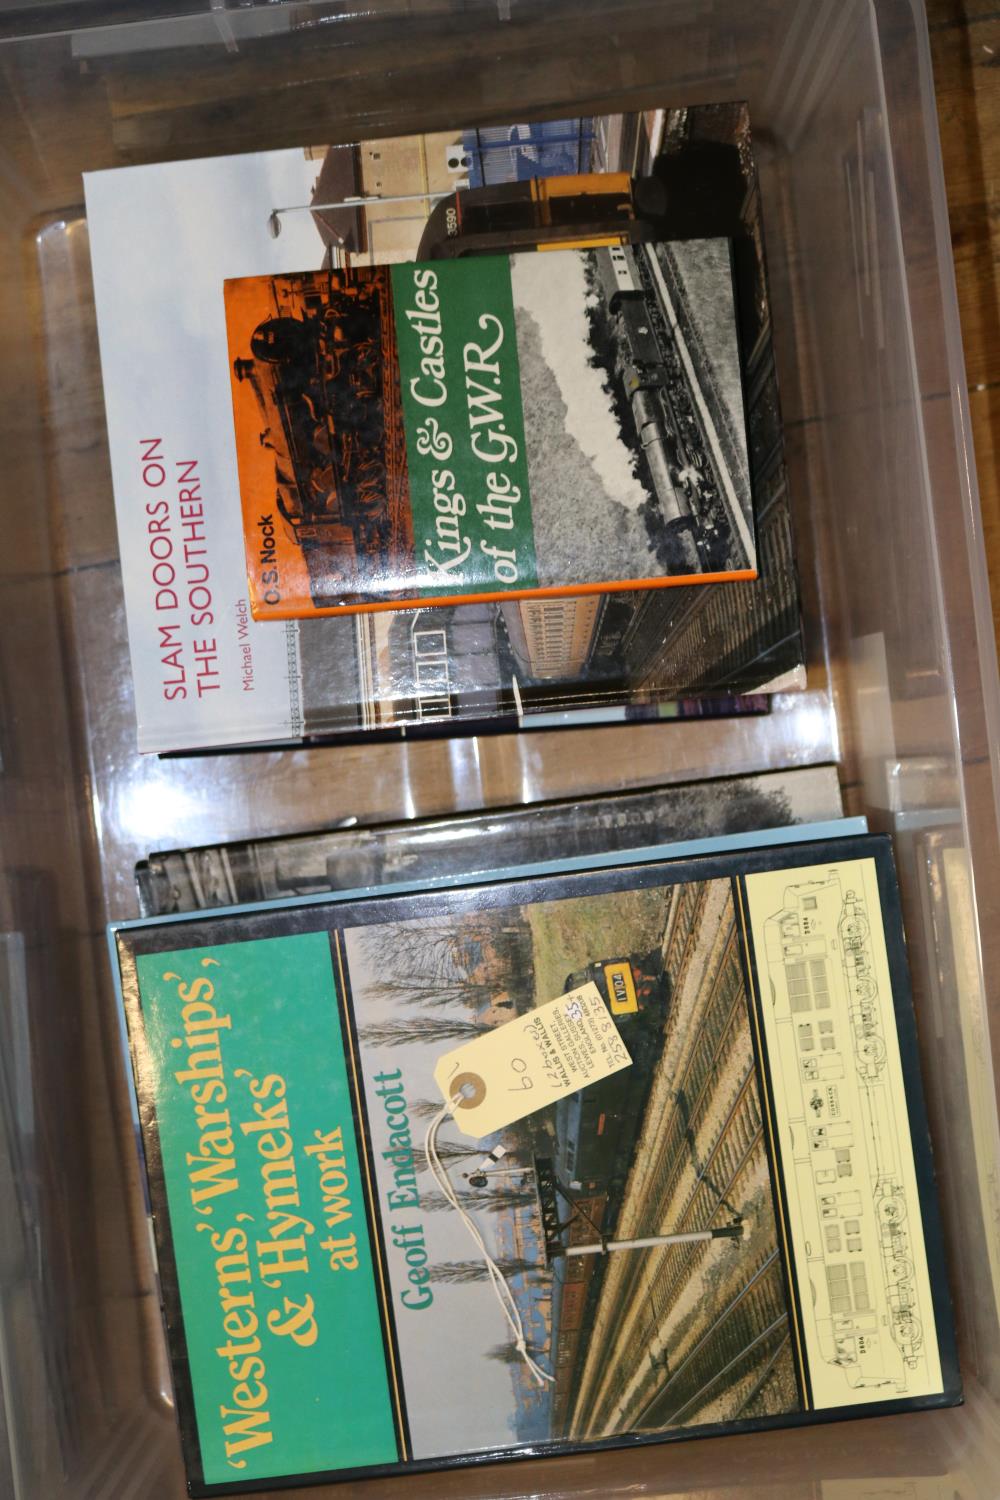 30 Plus Transport Books. Most railway with a few bus related. Published by Strathwood, OPC, - Image 2 of 2